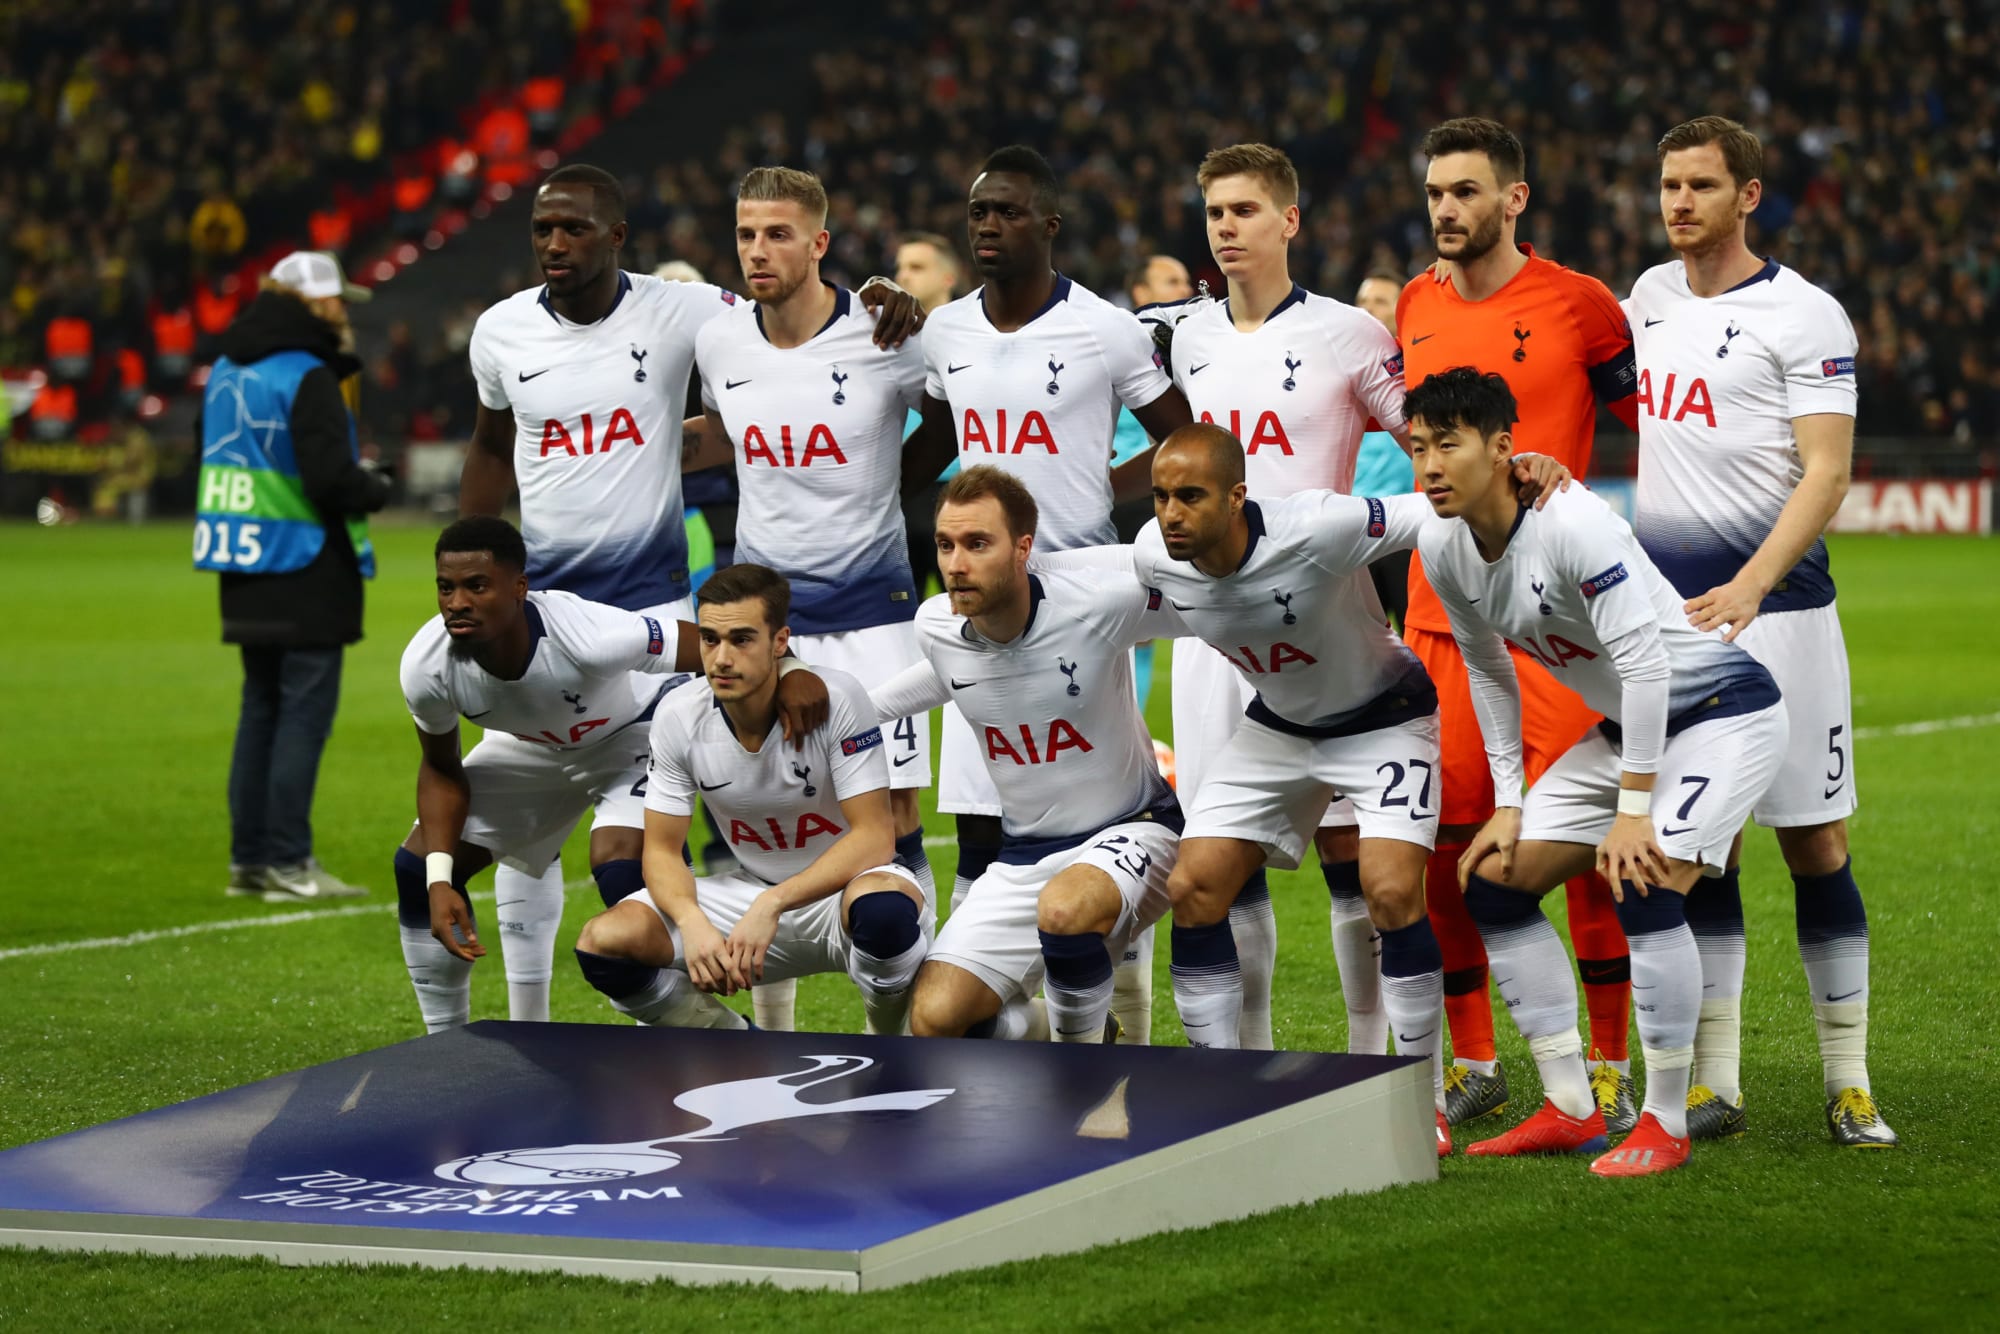 Road Ahead for Tottenham Hotspur Over the Next Month